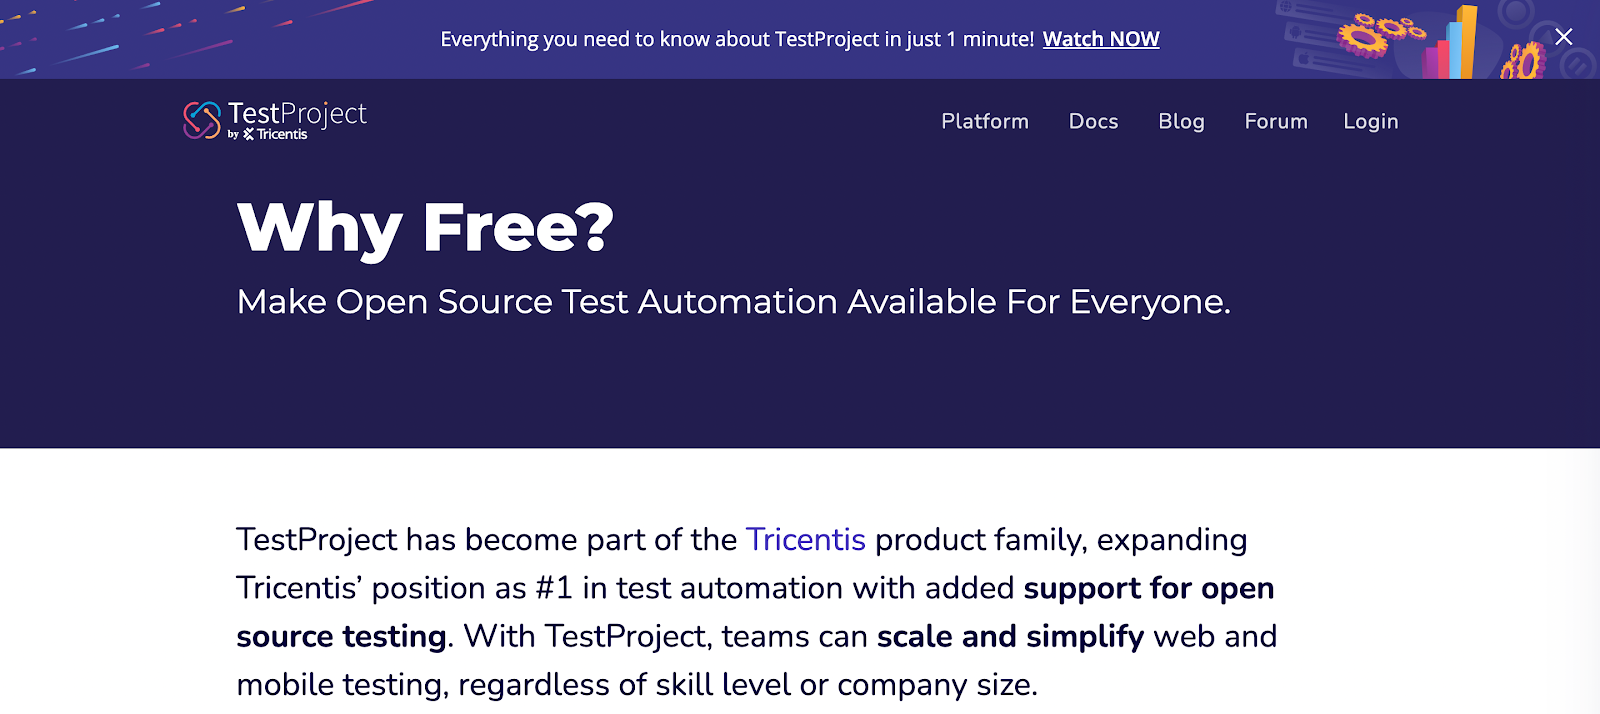 Cost To Automate Test Cases on iOS And Android Is Free